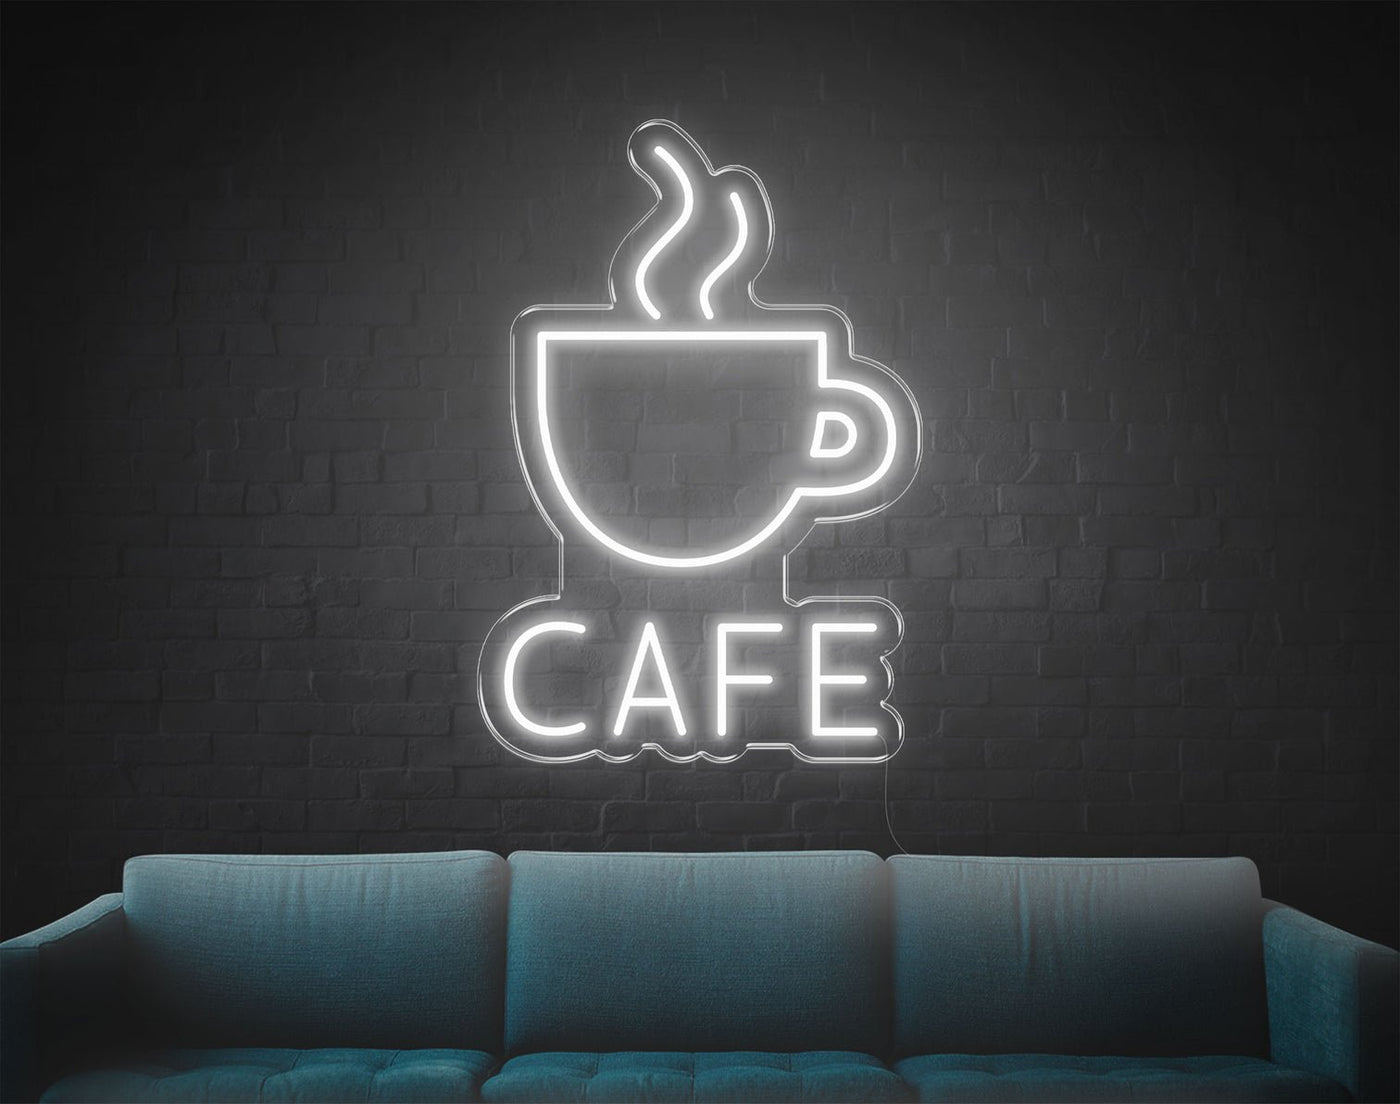 Cafe LED Neon Sign - 25inch x 17inchWhite